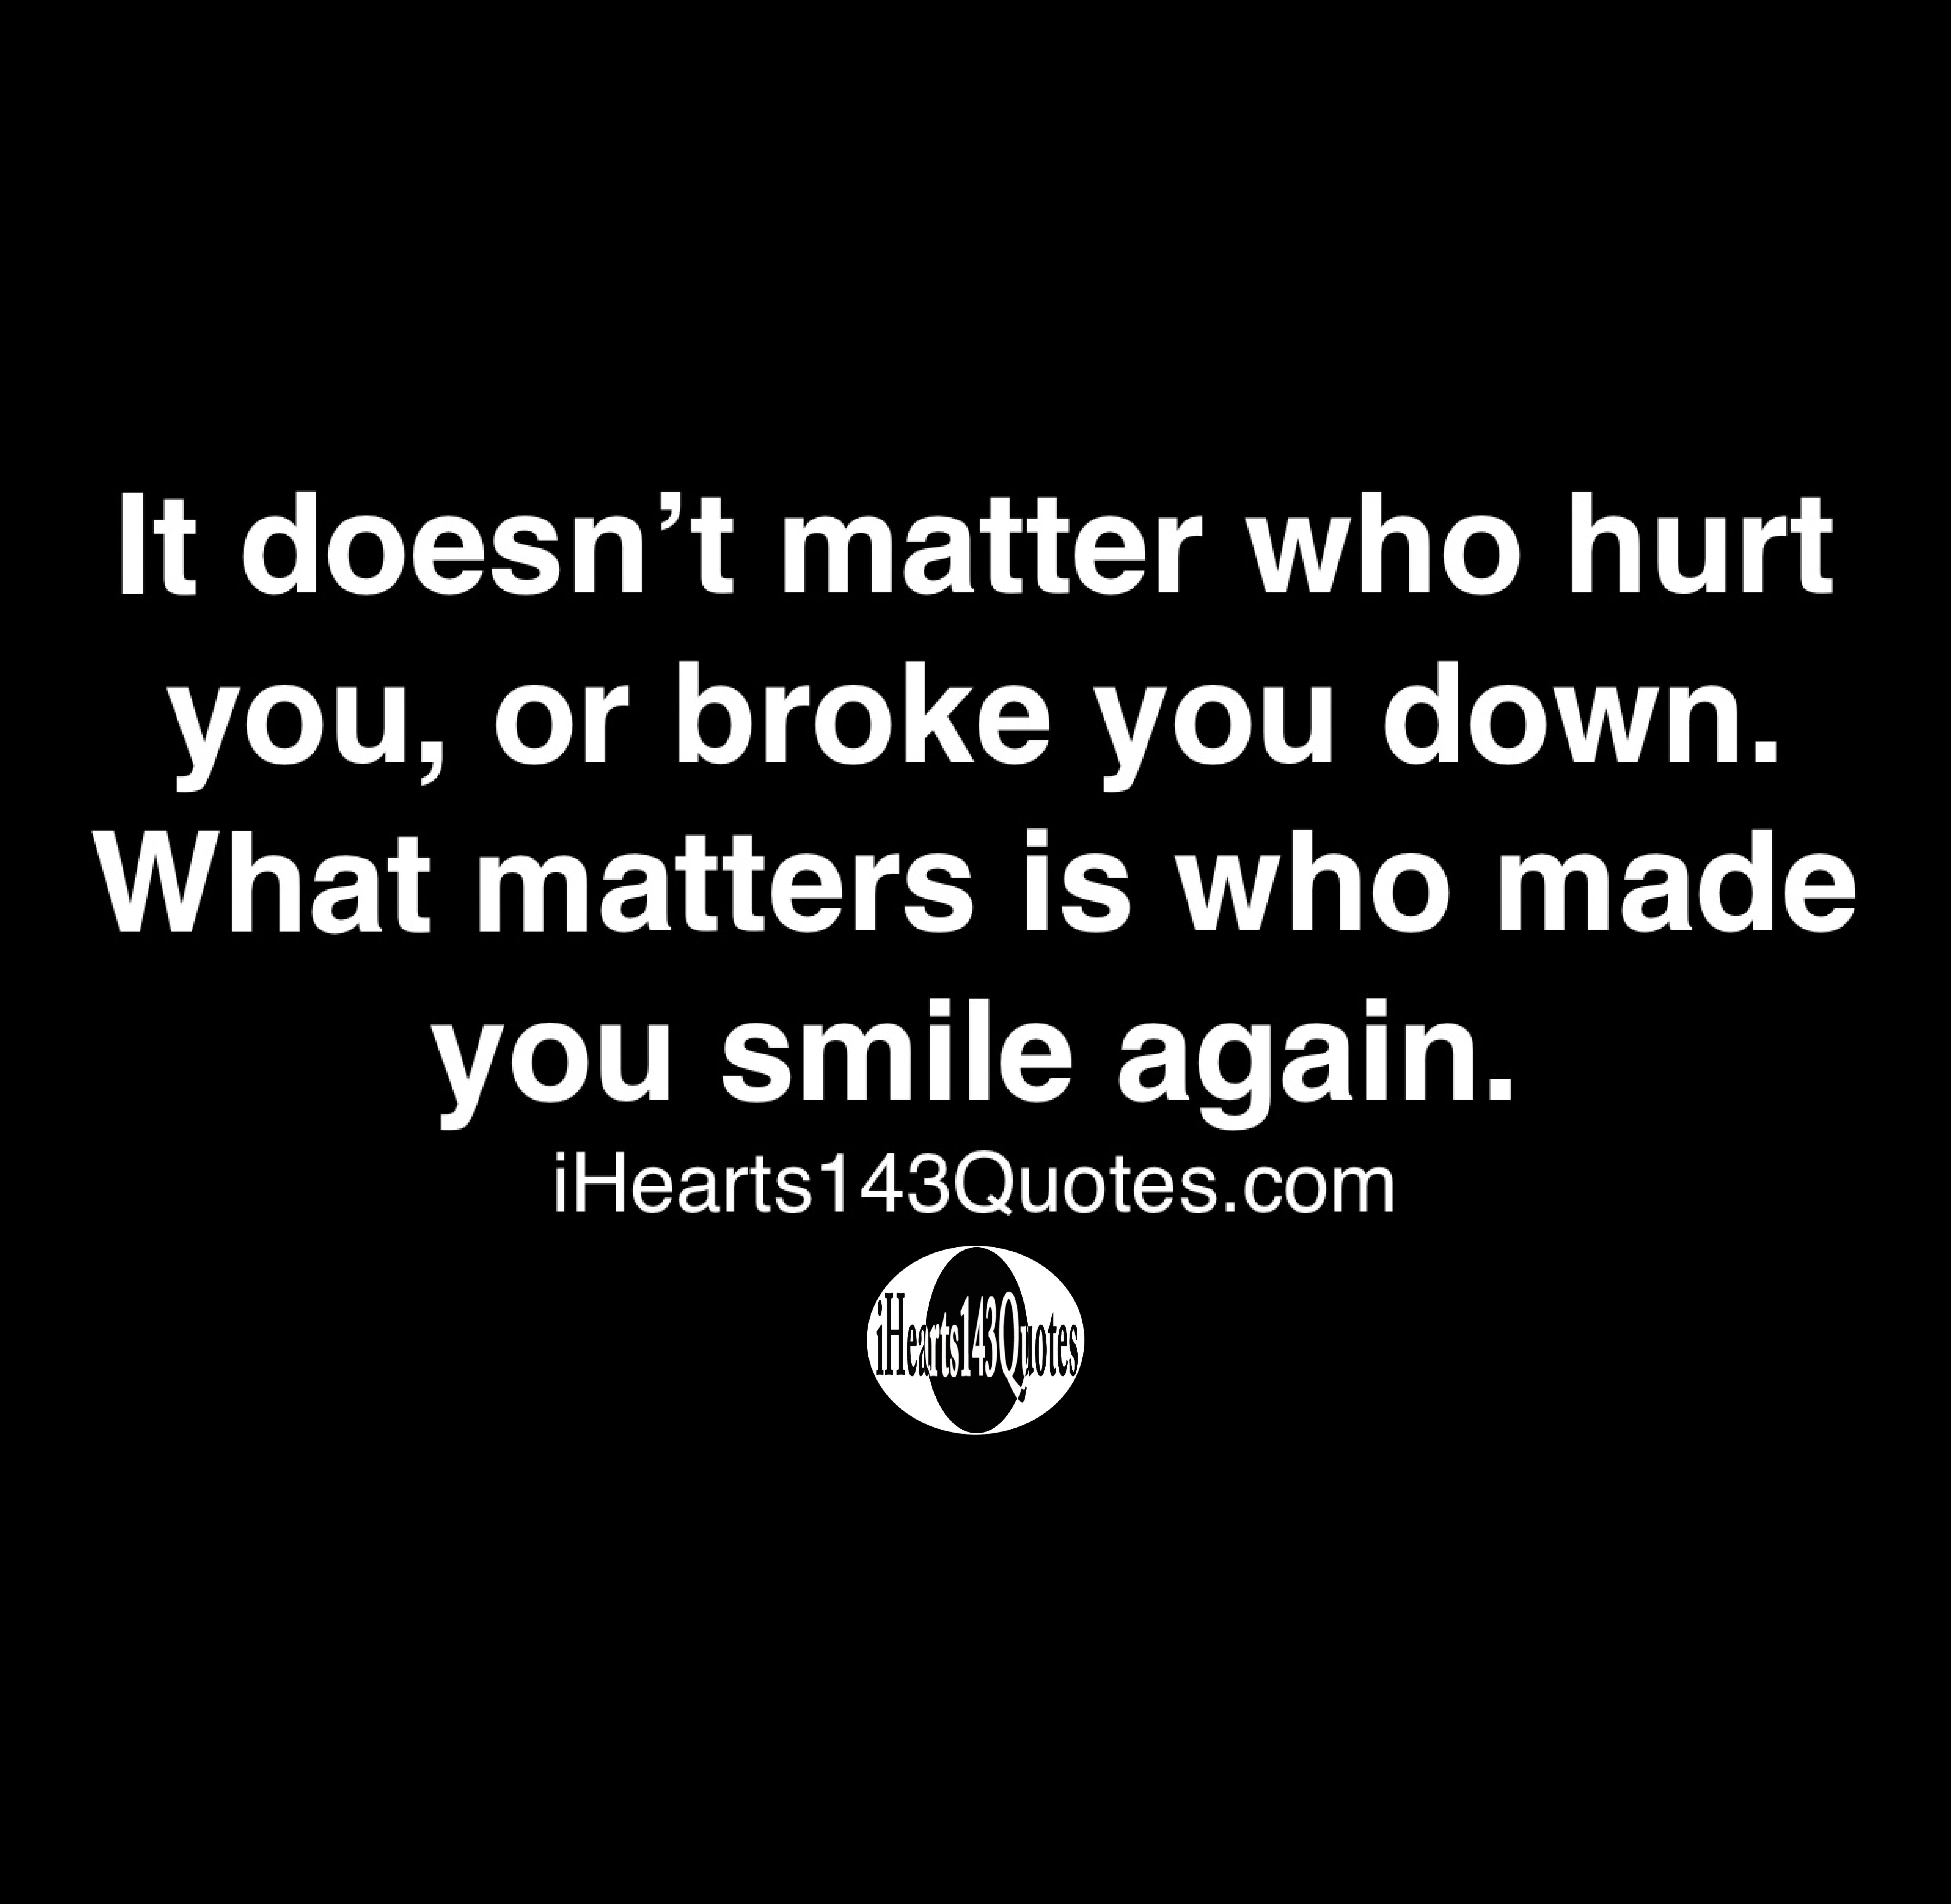 It Doesn T Matter Who Hurt You Or Broke You Down What Matters Is Who Made You Smile Again Quotes Ihearts143quotes